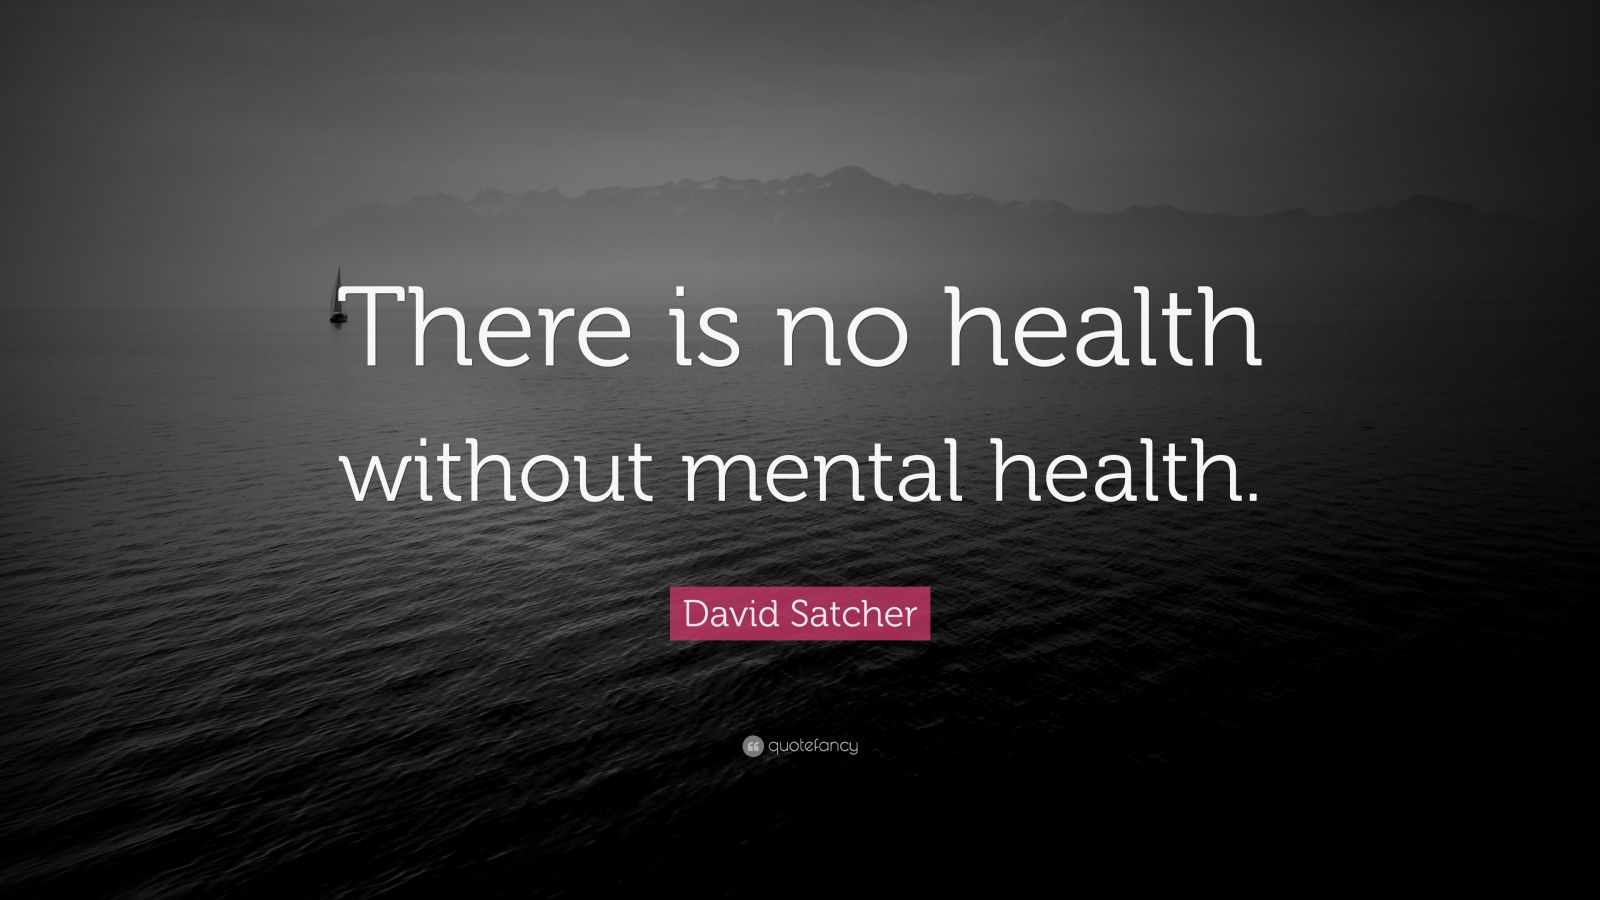 David Satcher Quote: “There is no health without mental health.” (9